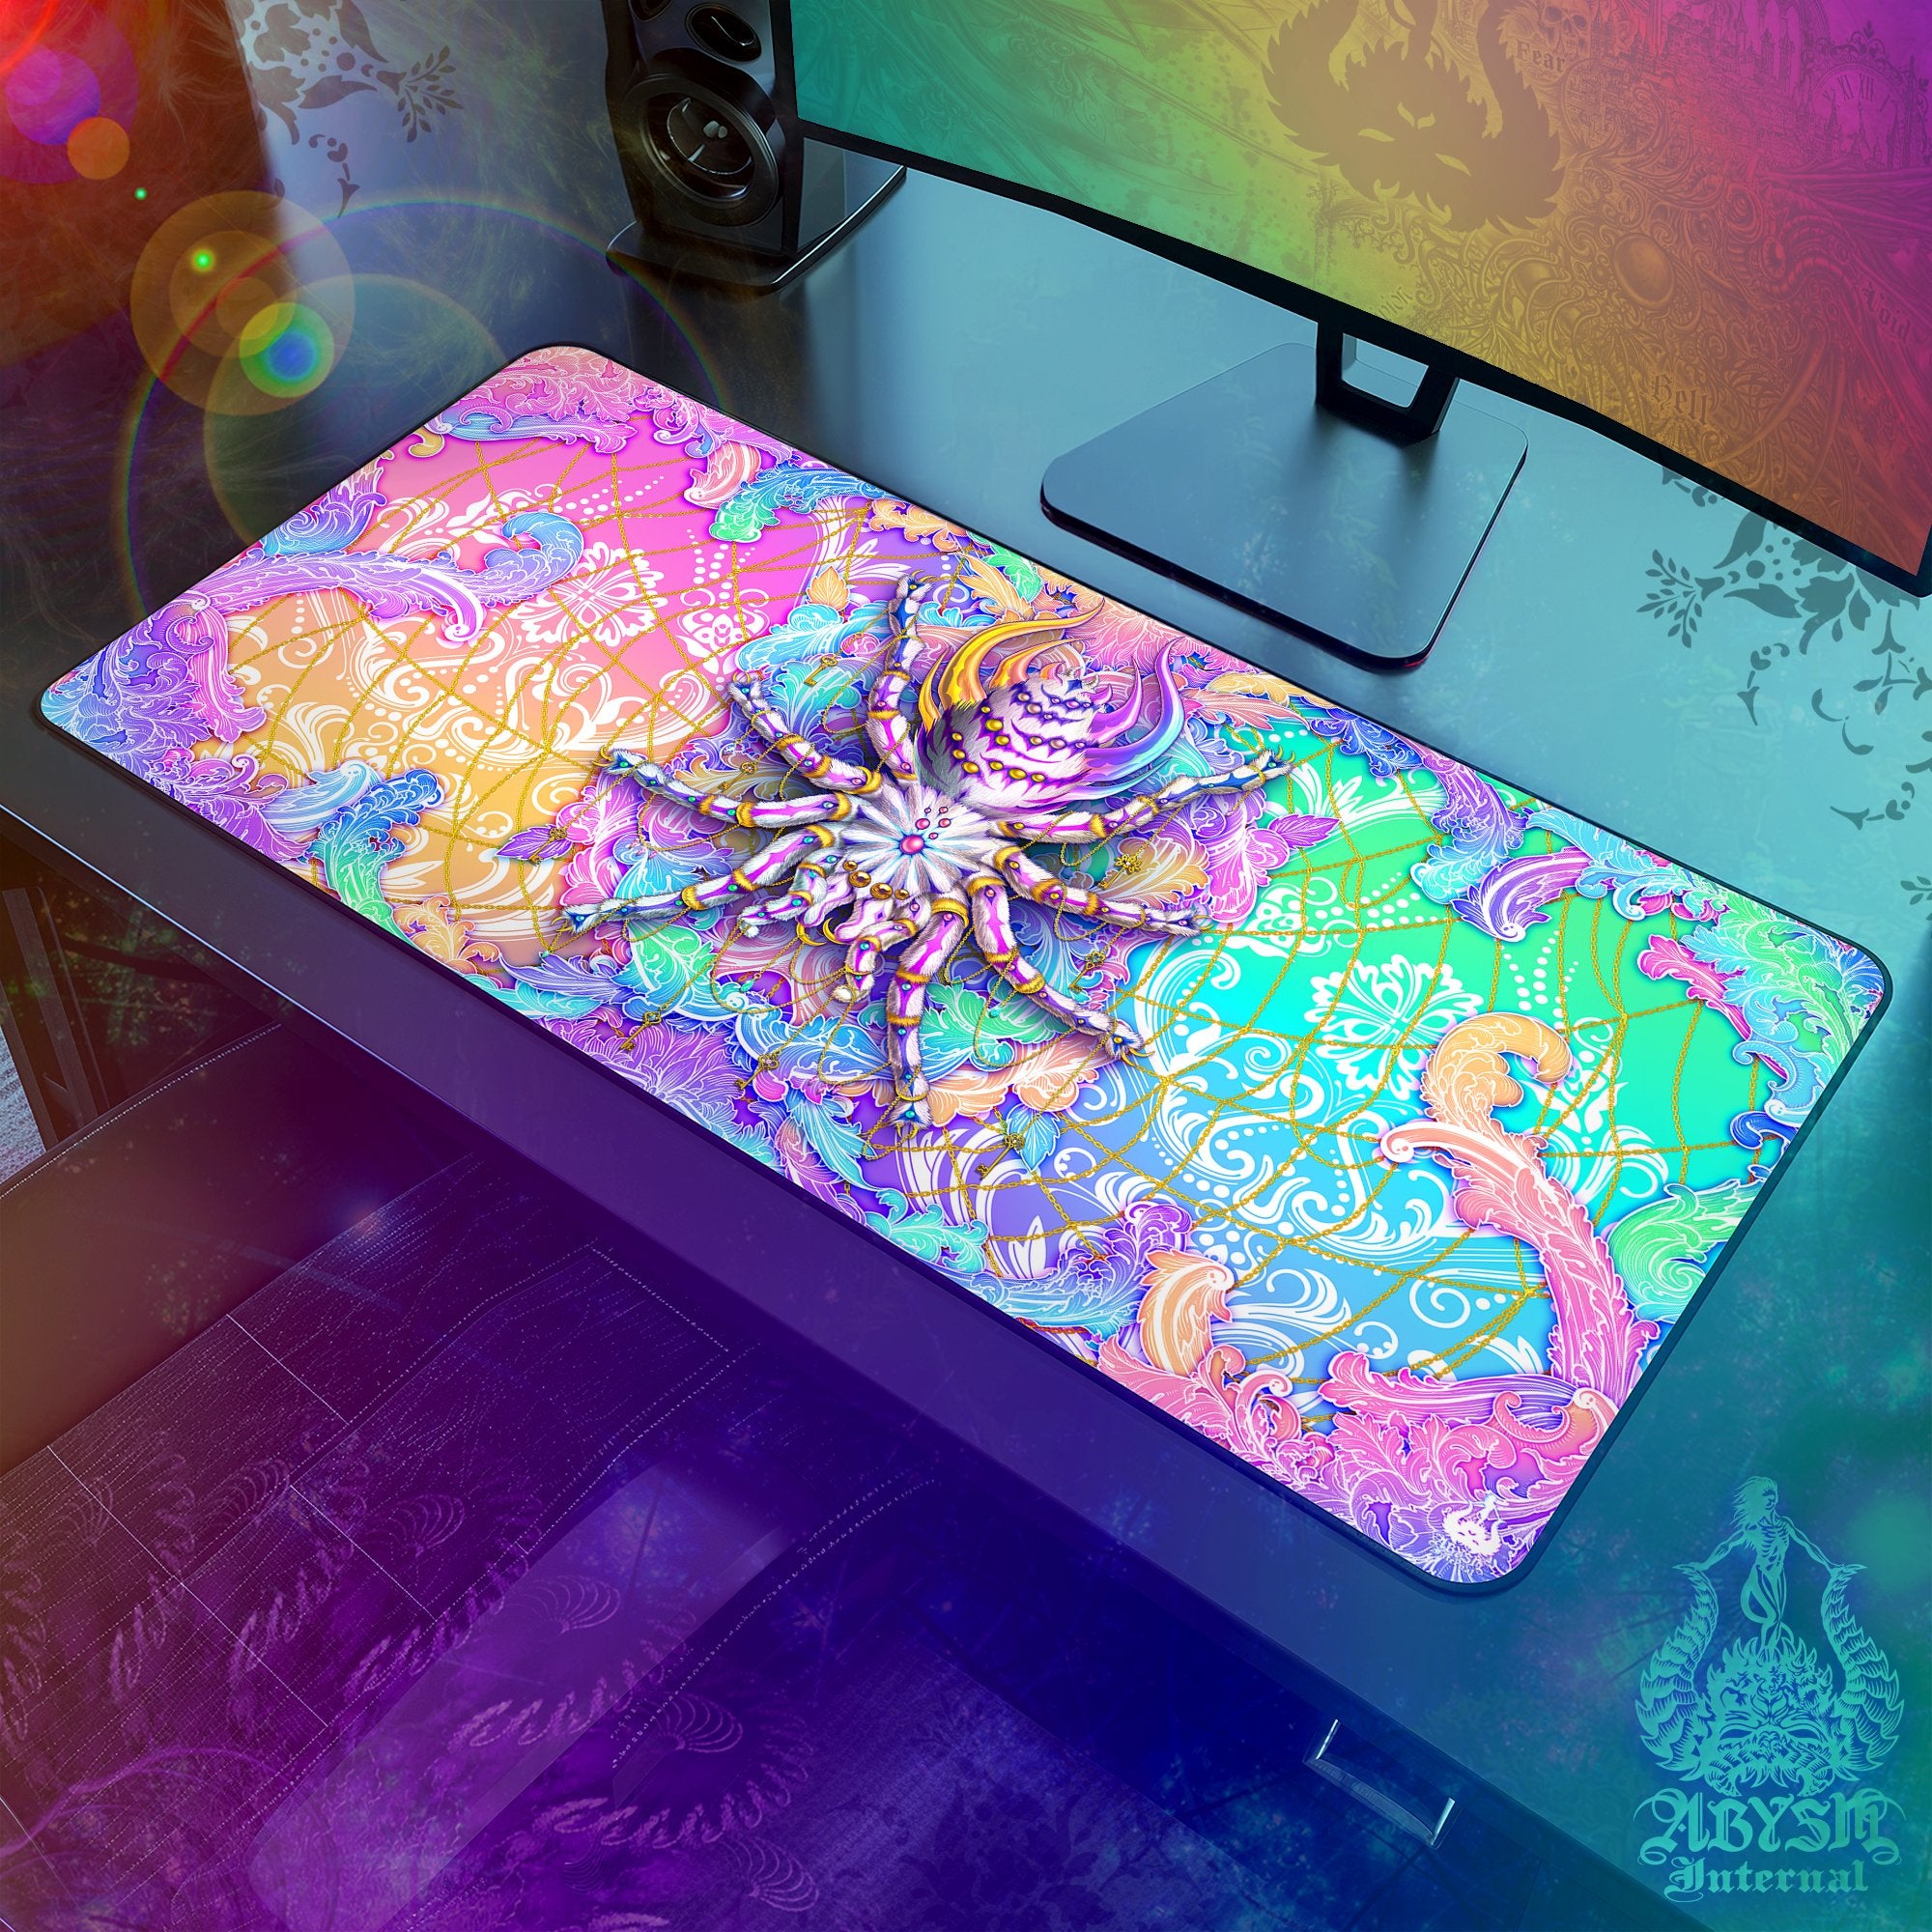 Psychedelic Workpad, Pastel Desk Mat, Spider Gaming Mouse Pad, Girl Gamer Table Protector Cover, Tarantula Art Print - Abysm Internal